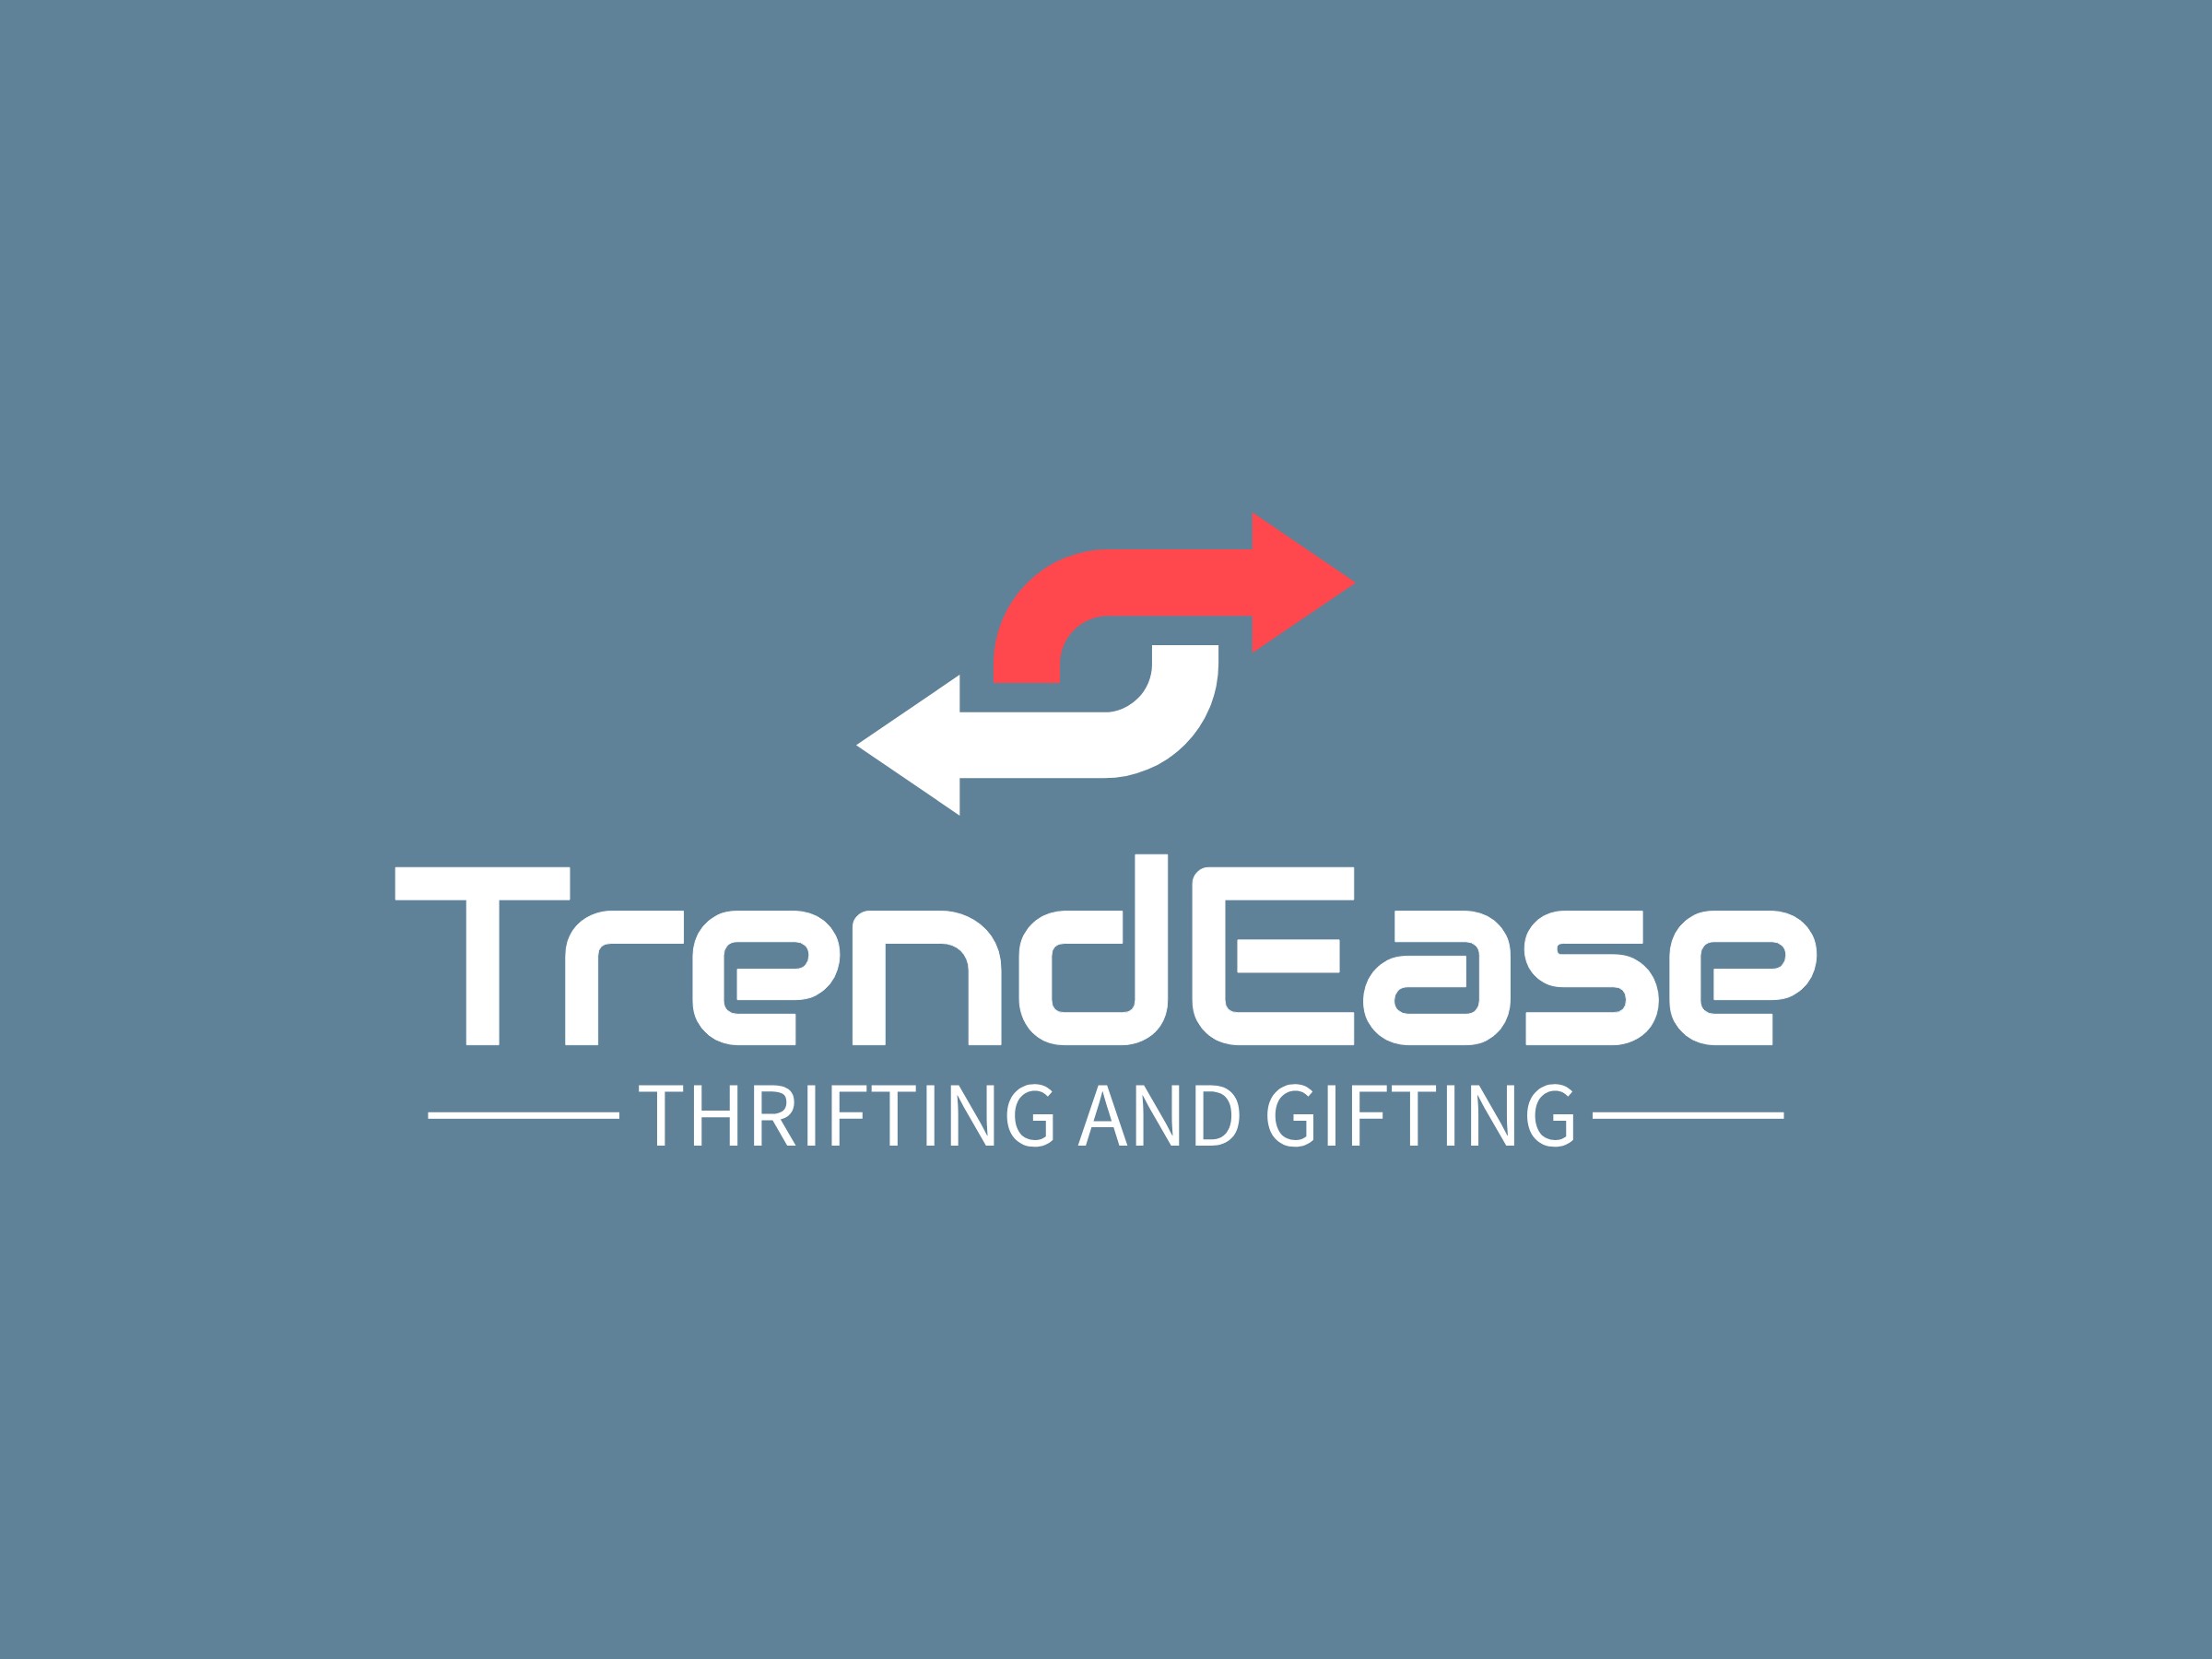 TrendEase - Thrifting and gifting